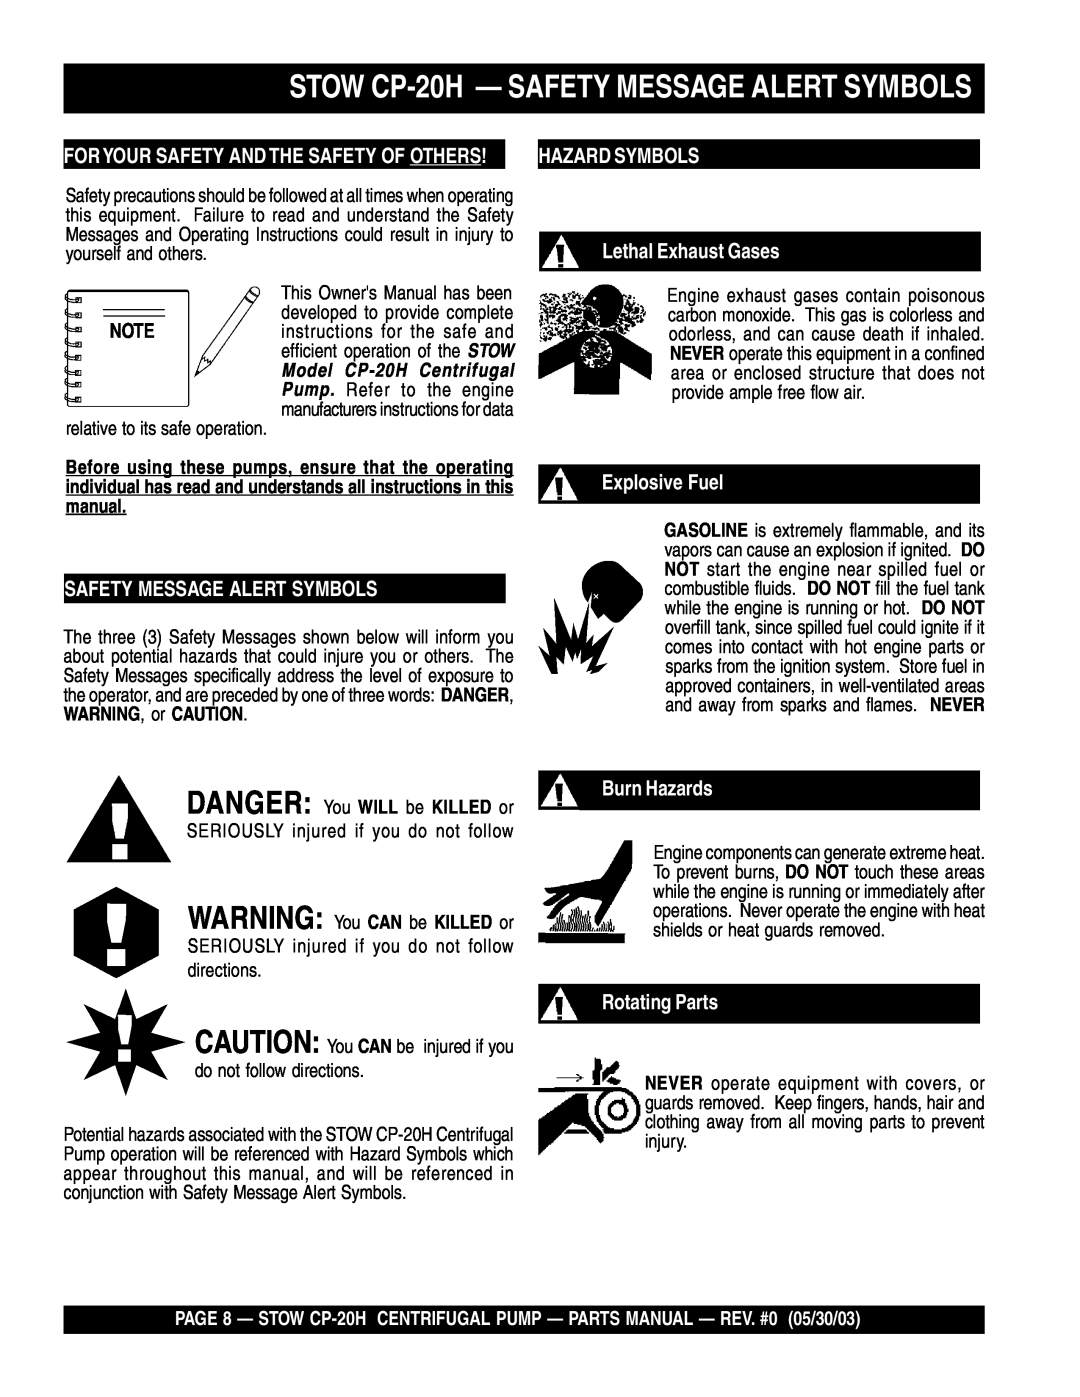 Stow STOW CP-20H- SAFETY MESSAGE ALERT SYMBOLS, Hazard Symbols, Safety Message Alert Symbols, Lethal Exhaust Gases 